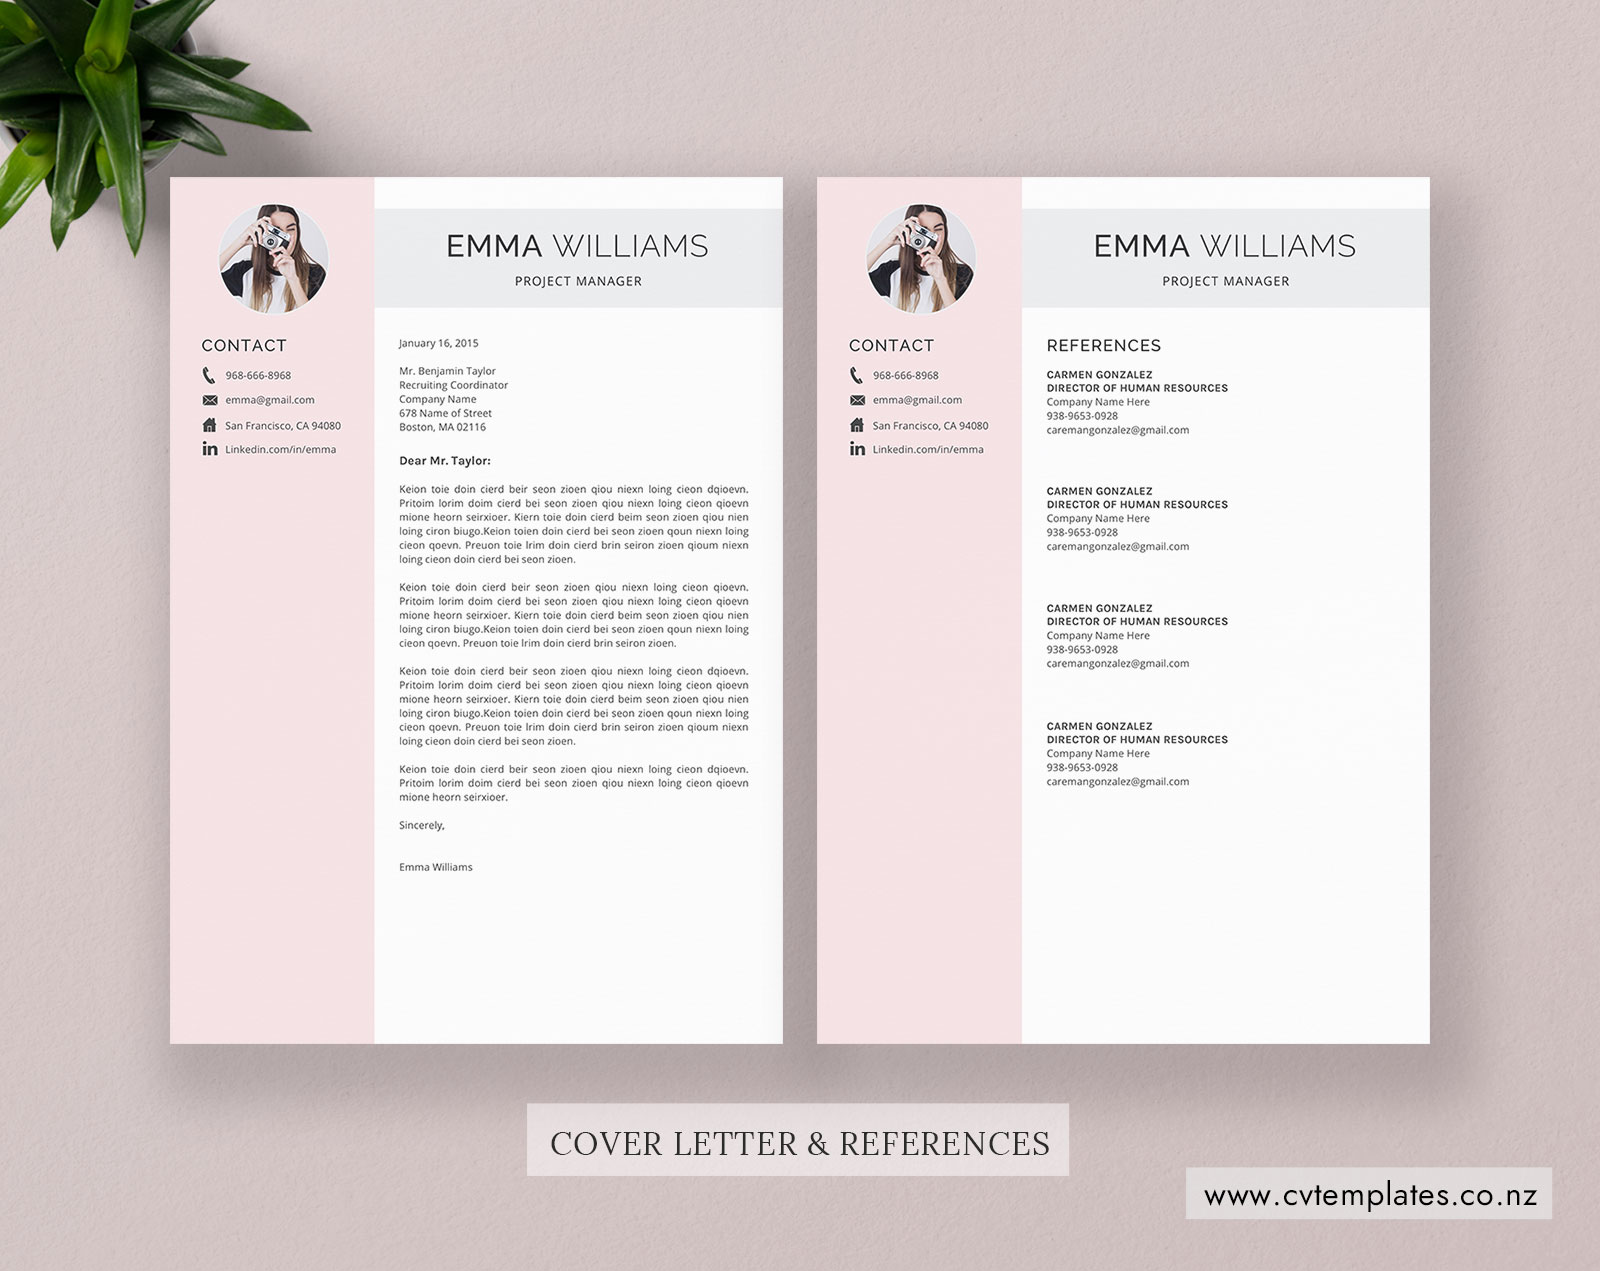 Cv Template For Ms Word Minimalist Curriculum Vitae Professional Cv Template Cover Letter Modern Creative Resume Template Design Instant Download Emma Cv Template Cvtemplates Co Nz